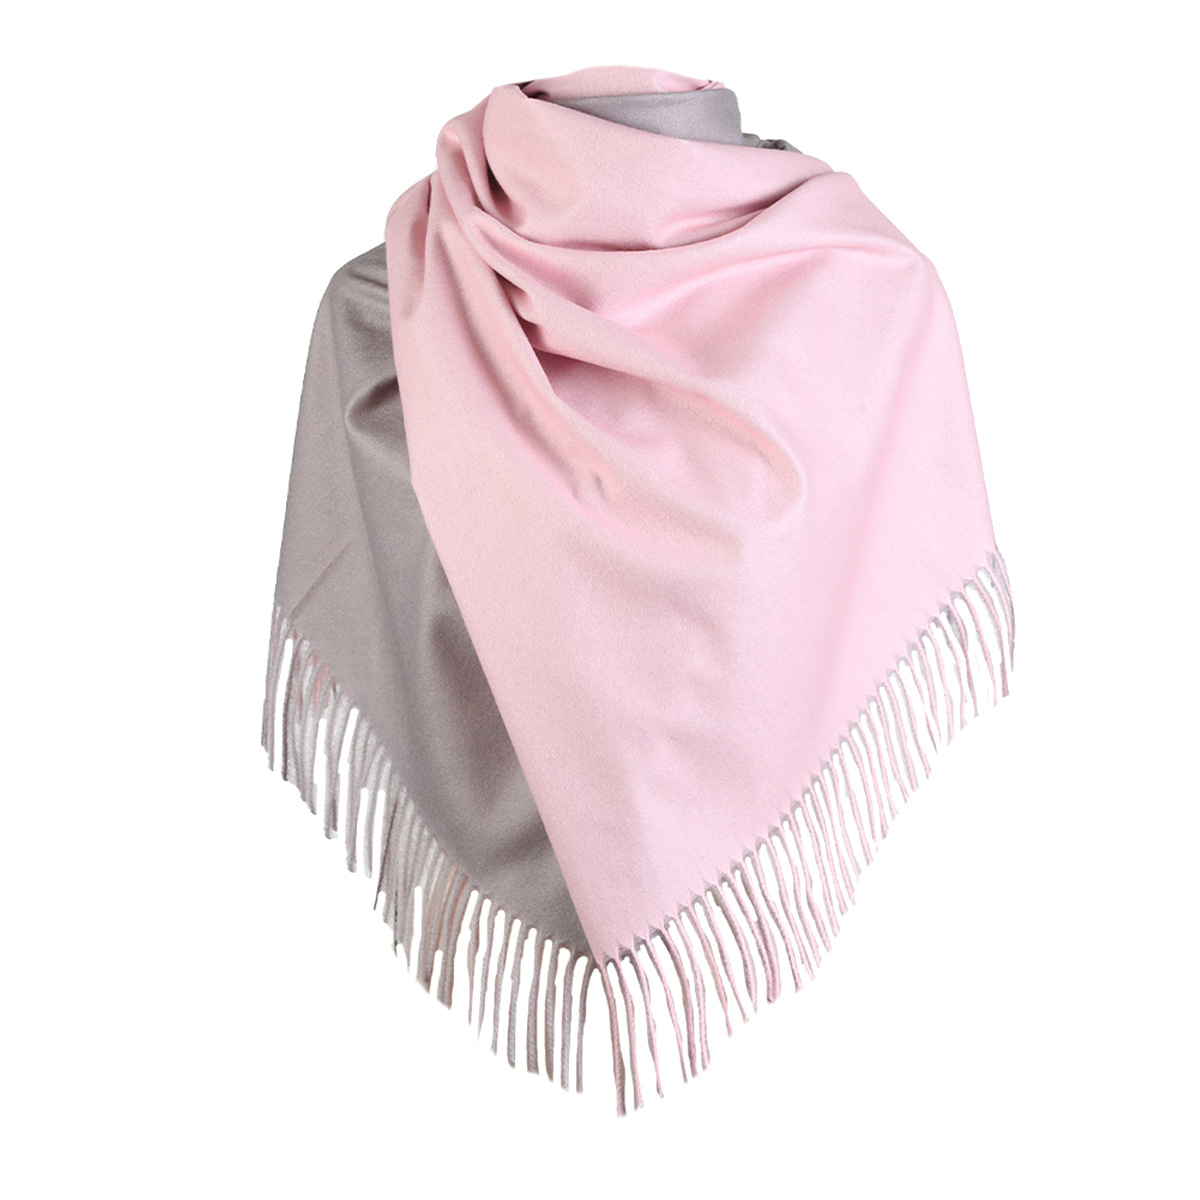 New European and American Fashion All-Match Double-Sided Two-Color Cashmere Scarf Shawl Factory Wholesale Exclusive for Cross-Border